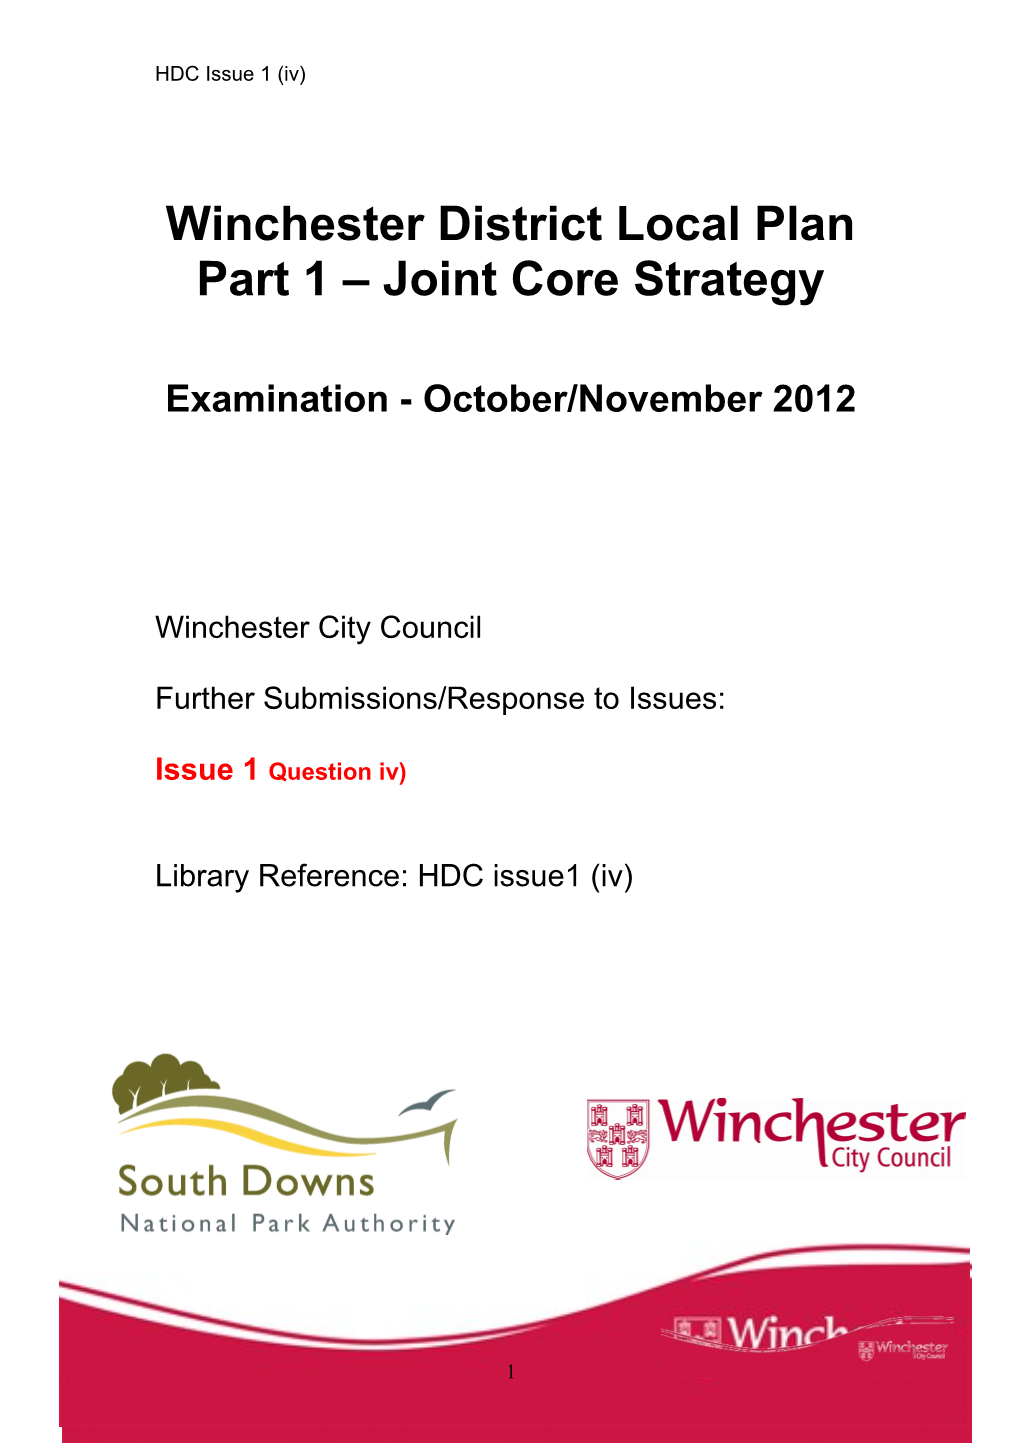 Winchester District Local Plan Part 1 Joint Core Strategy